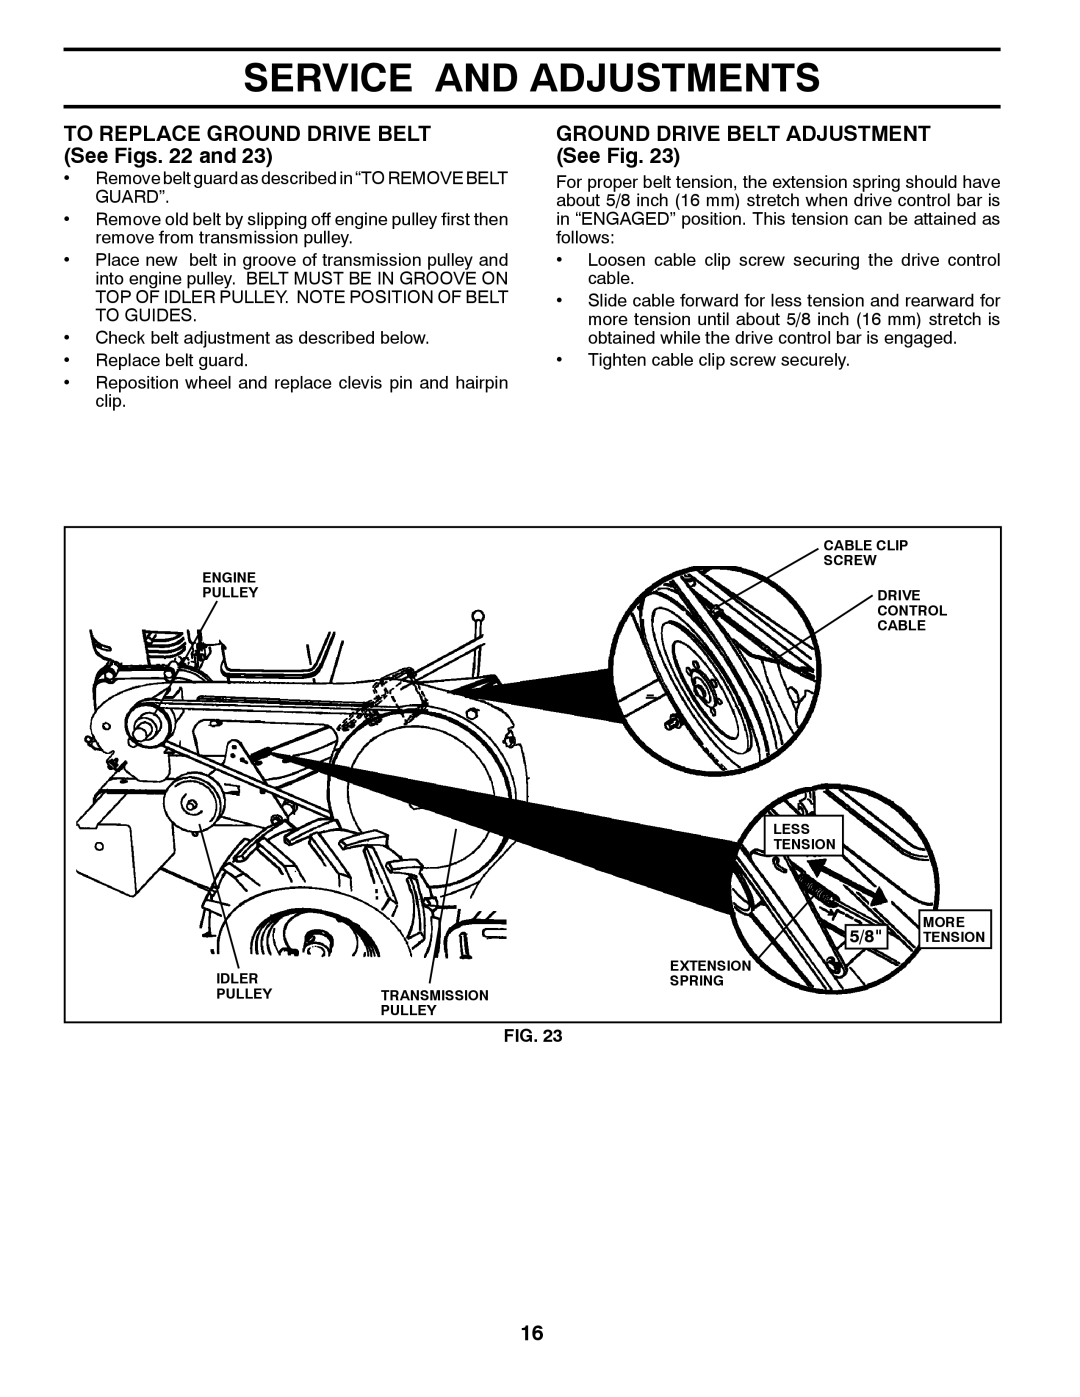 Poulan 423813 TO REPLACE GROUND DRIVE BELT See Figs. 22 and, GROUND DRIVE BELT ADJUSTMENT See Fig, Service And Adjustments 